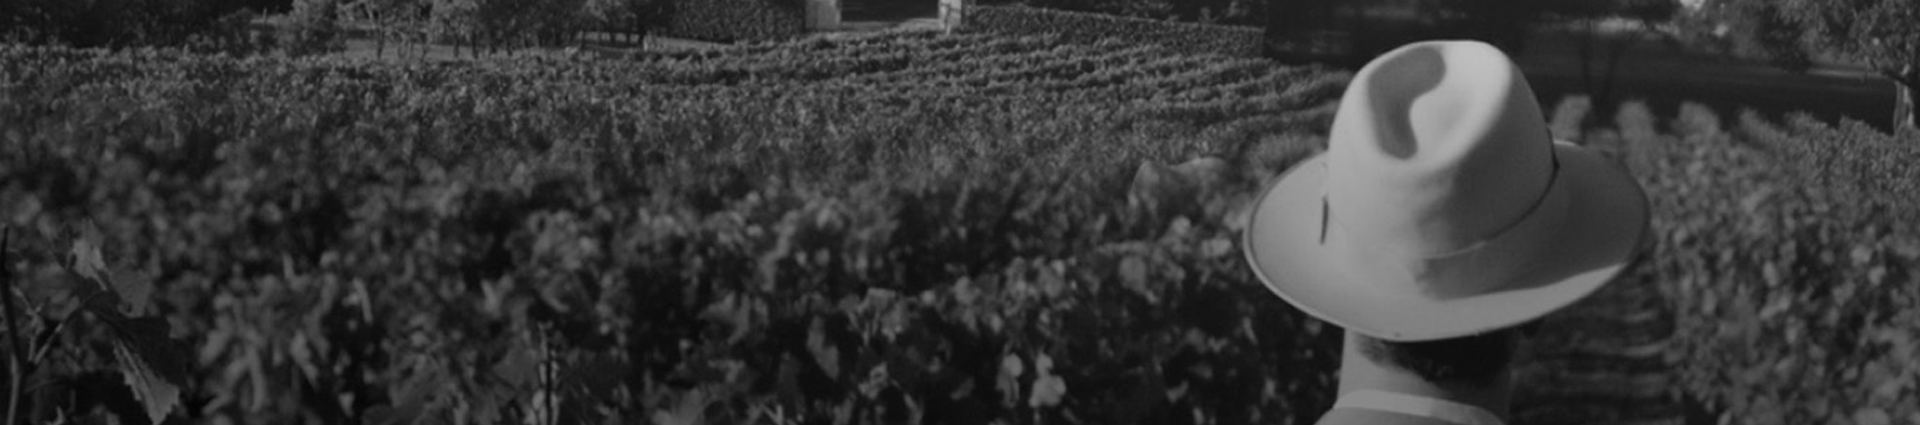 Man stands in vineyard.  Profile view, only the back of his hat is visible